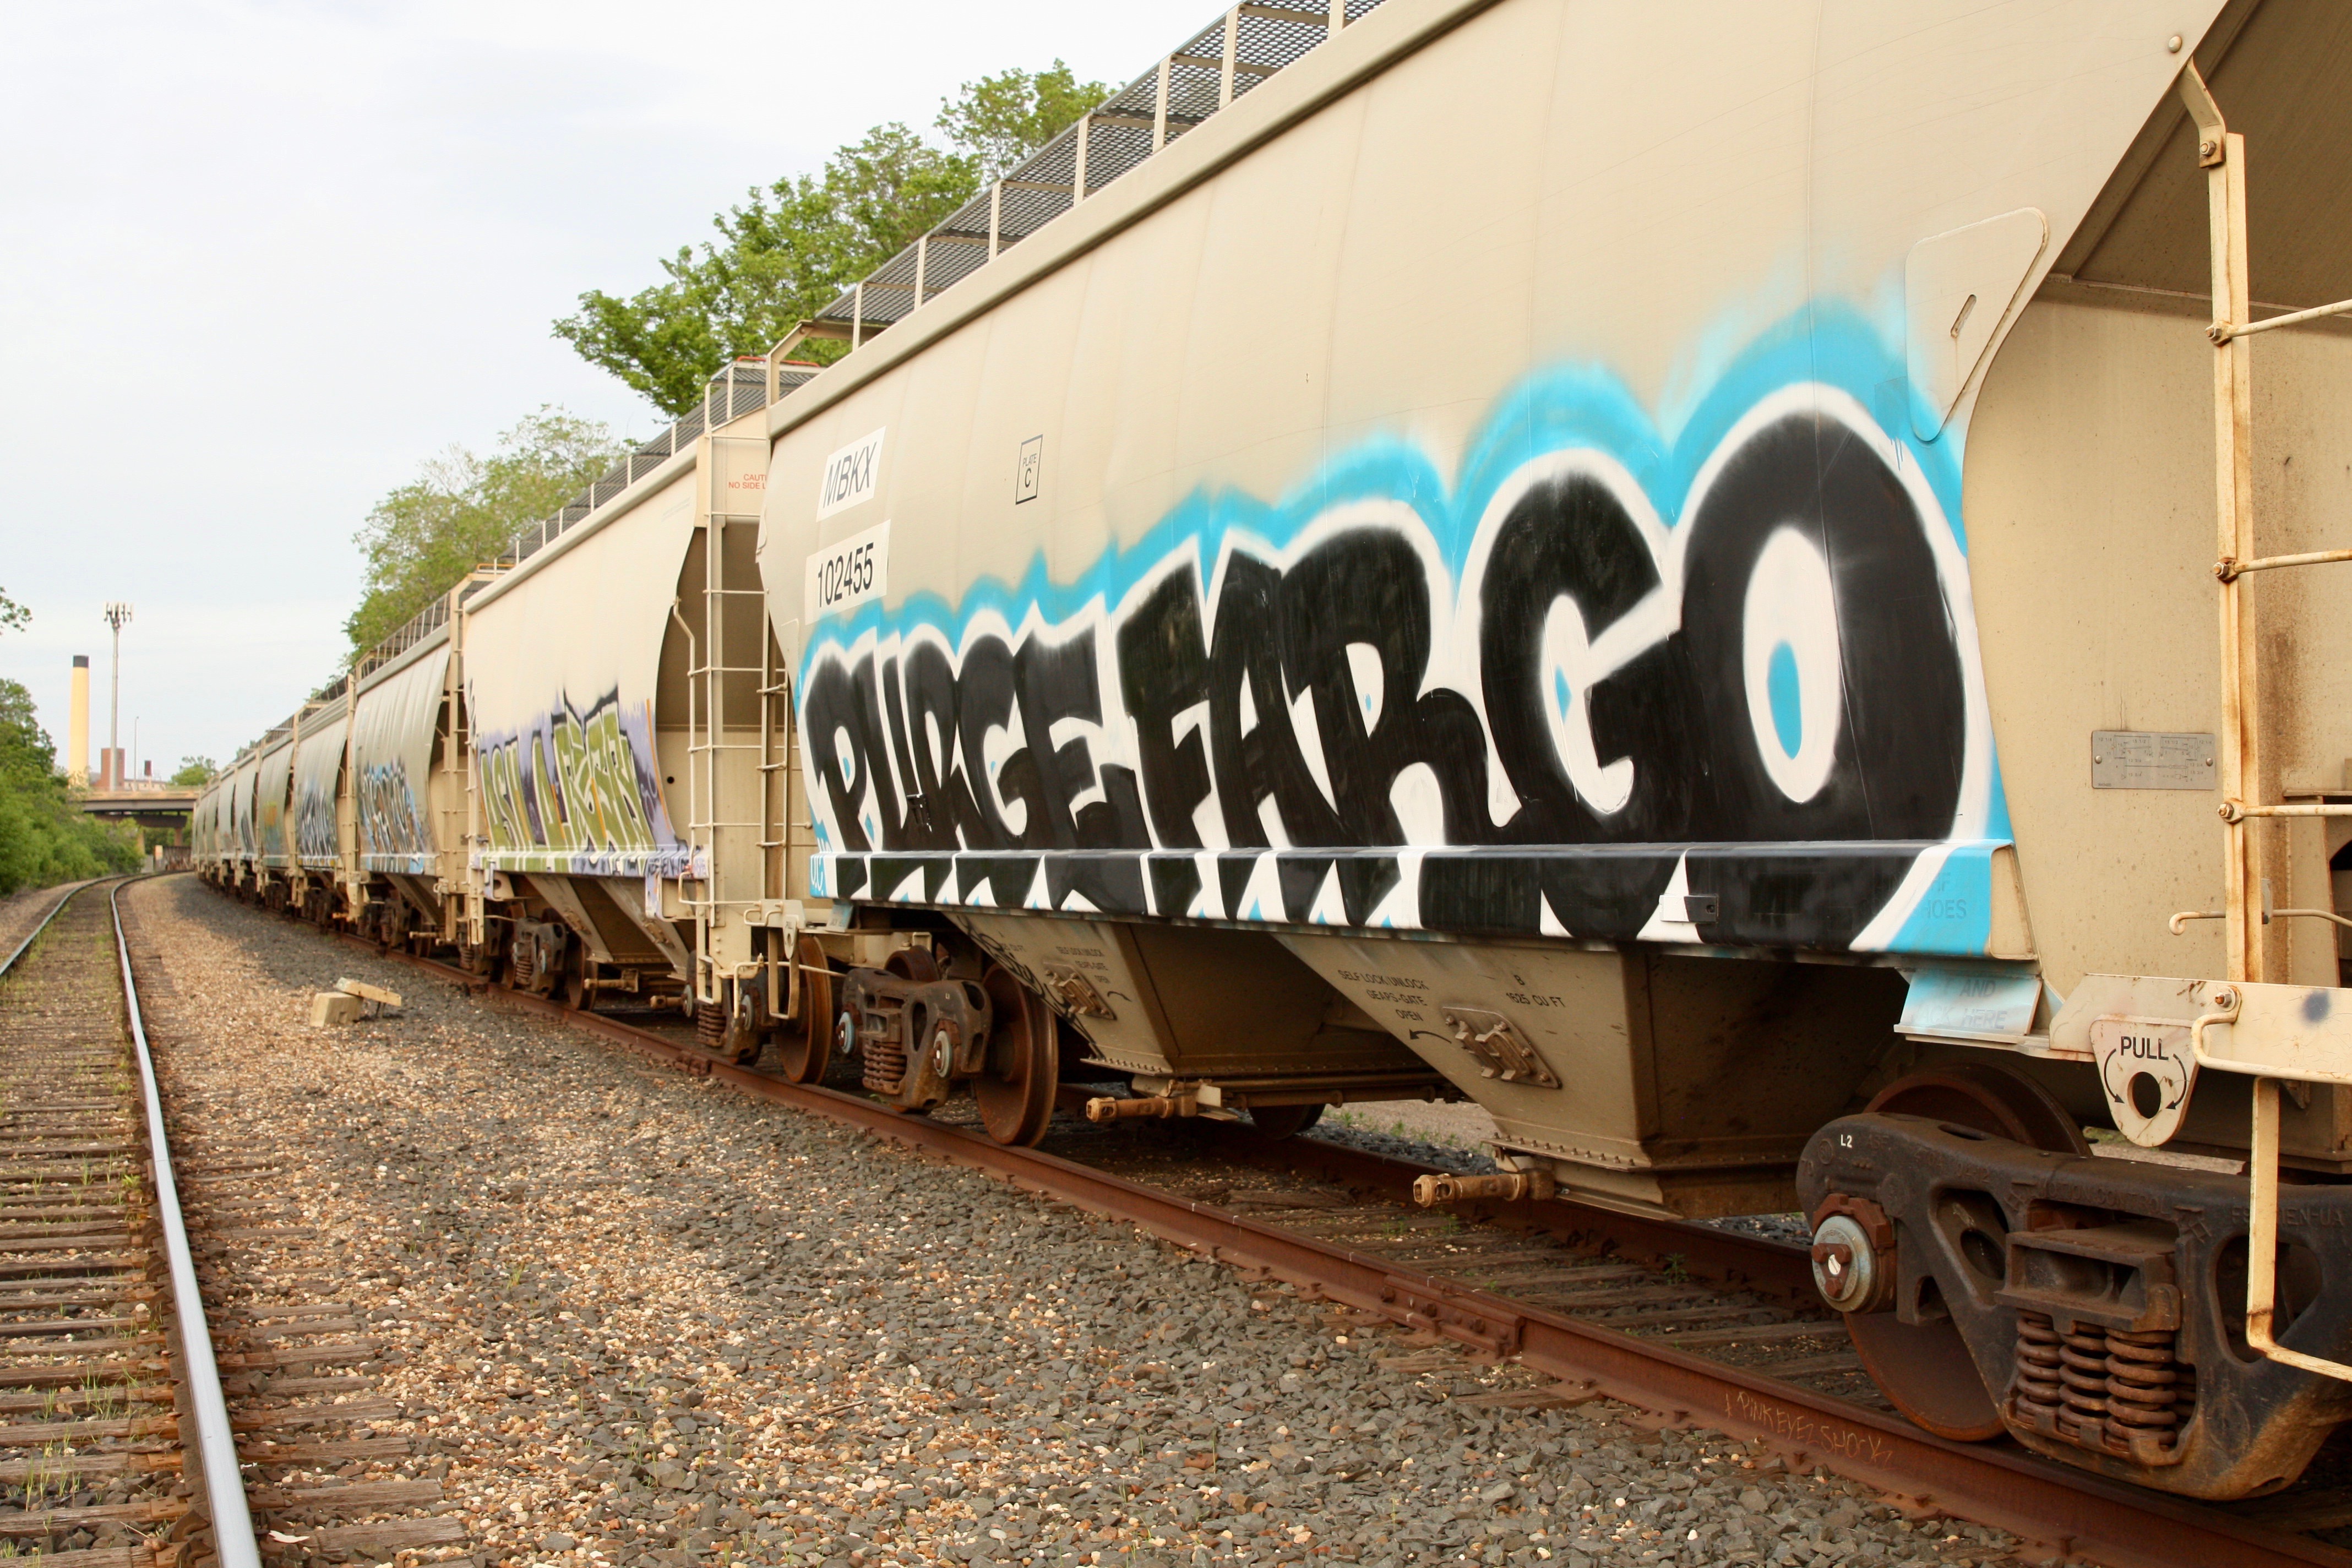 Most of the railroad cars have been tagged, many on both sides. The smokestack on the far left of the picture is the WestRock plant.